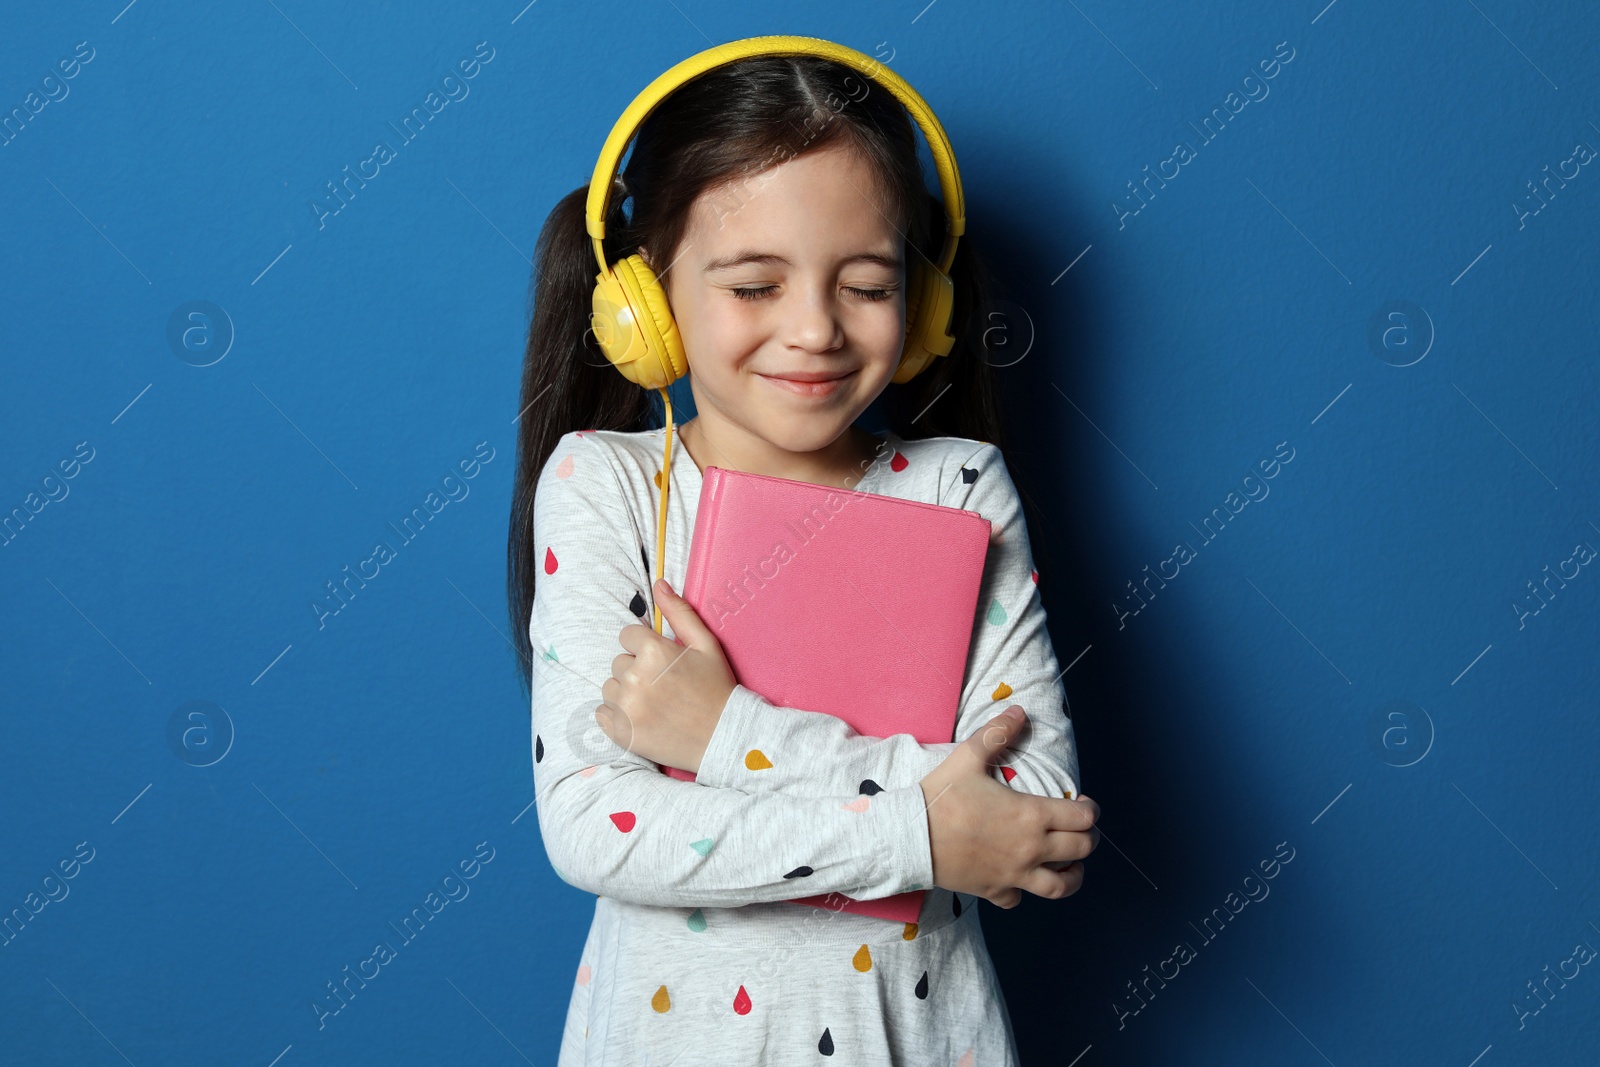 Photo of Cute little girl with headphones listening to audiobook on blue background